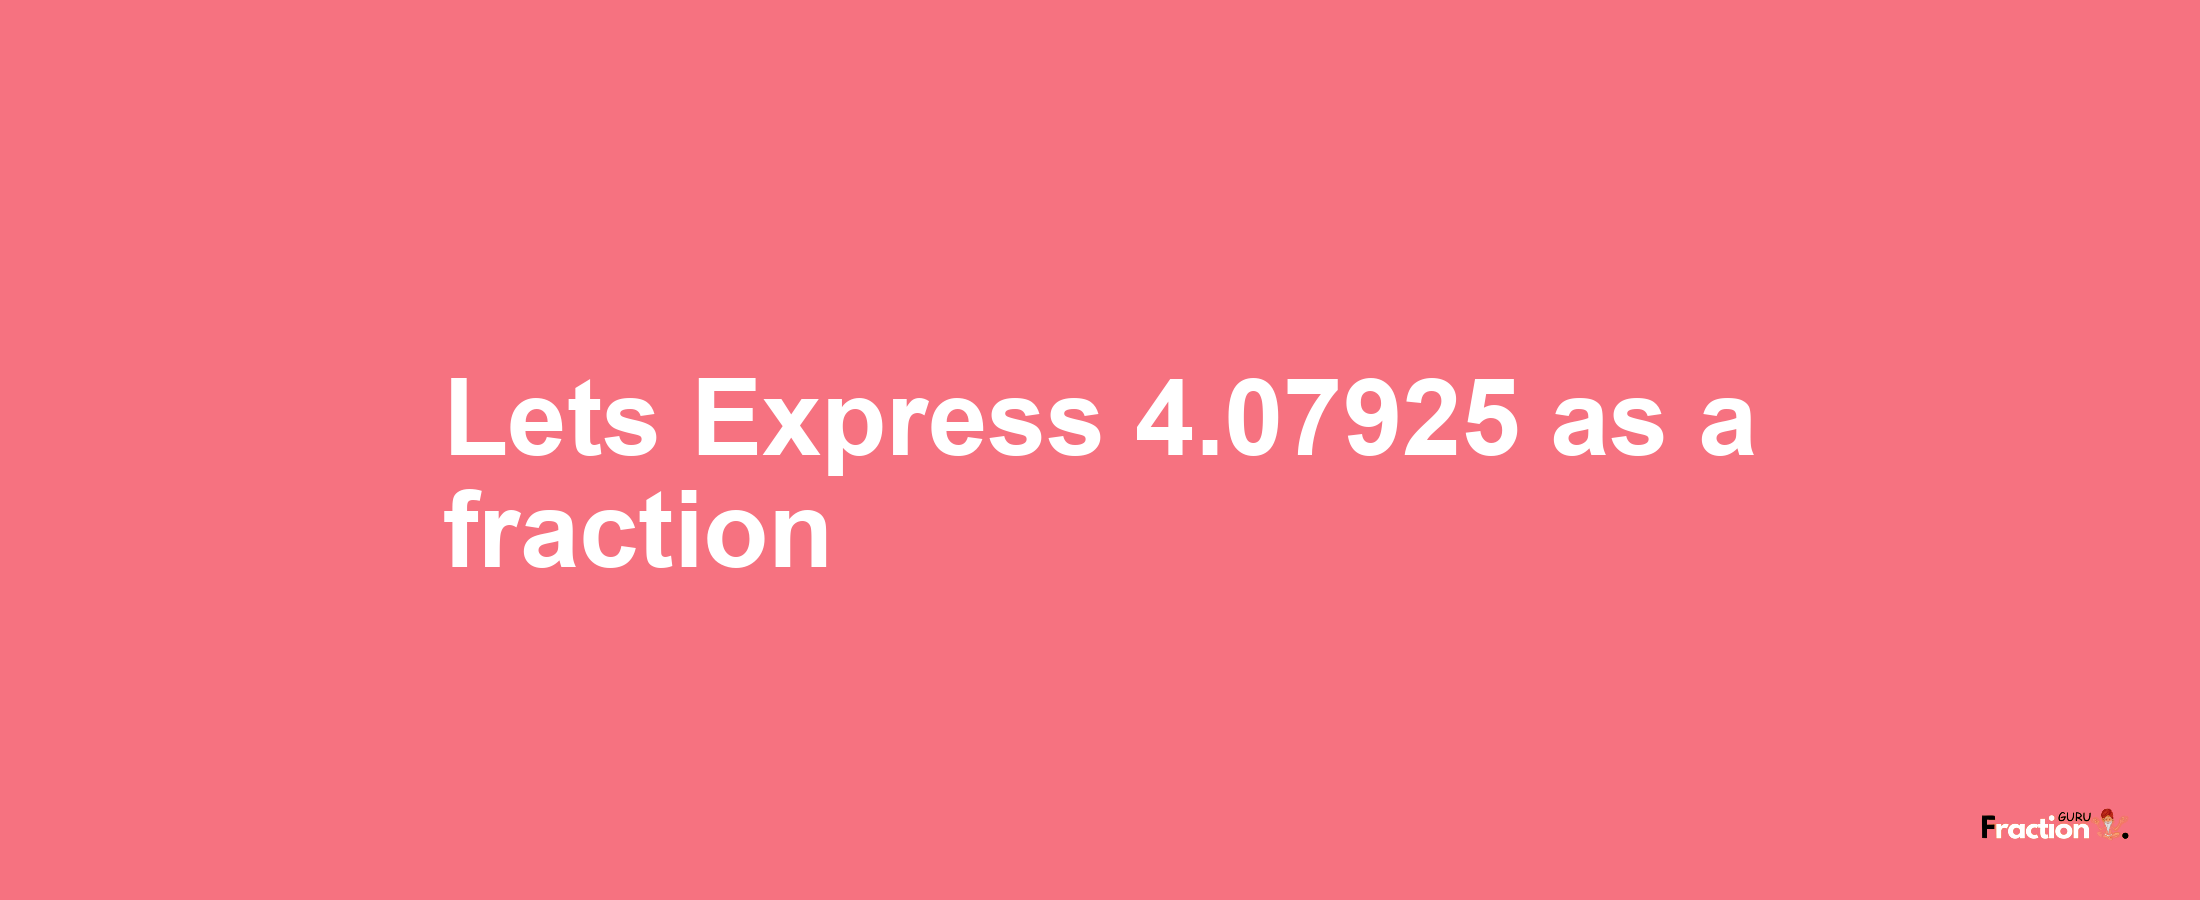 Lets Express 4.07925 as afraction